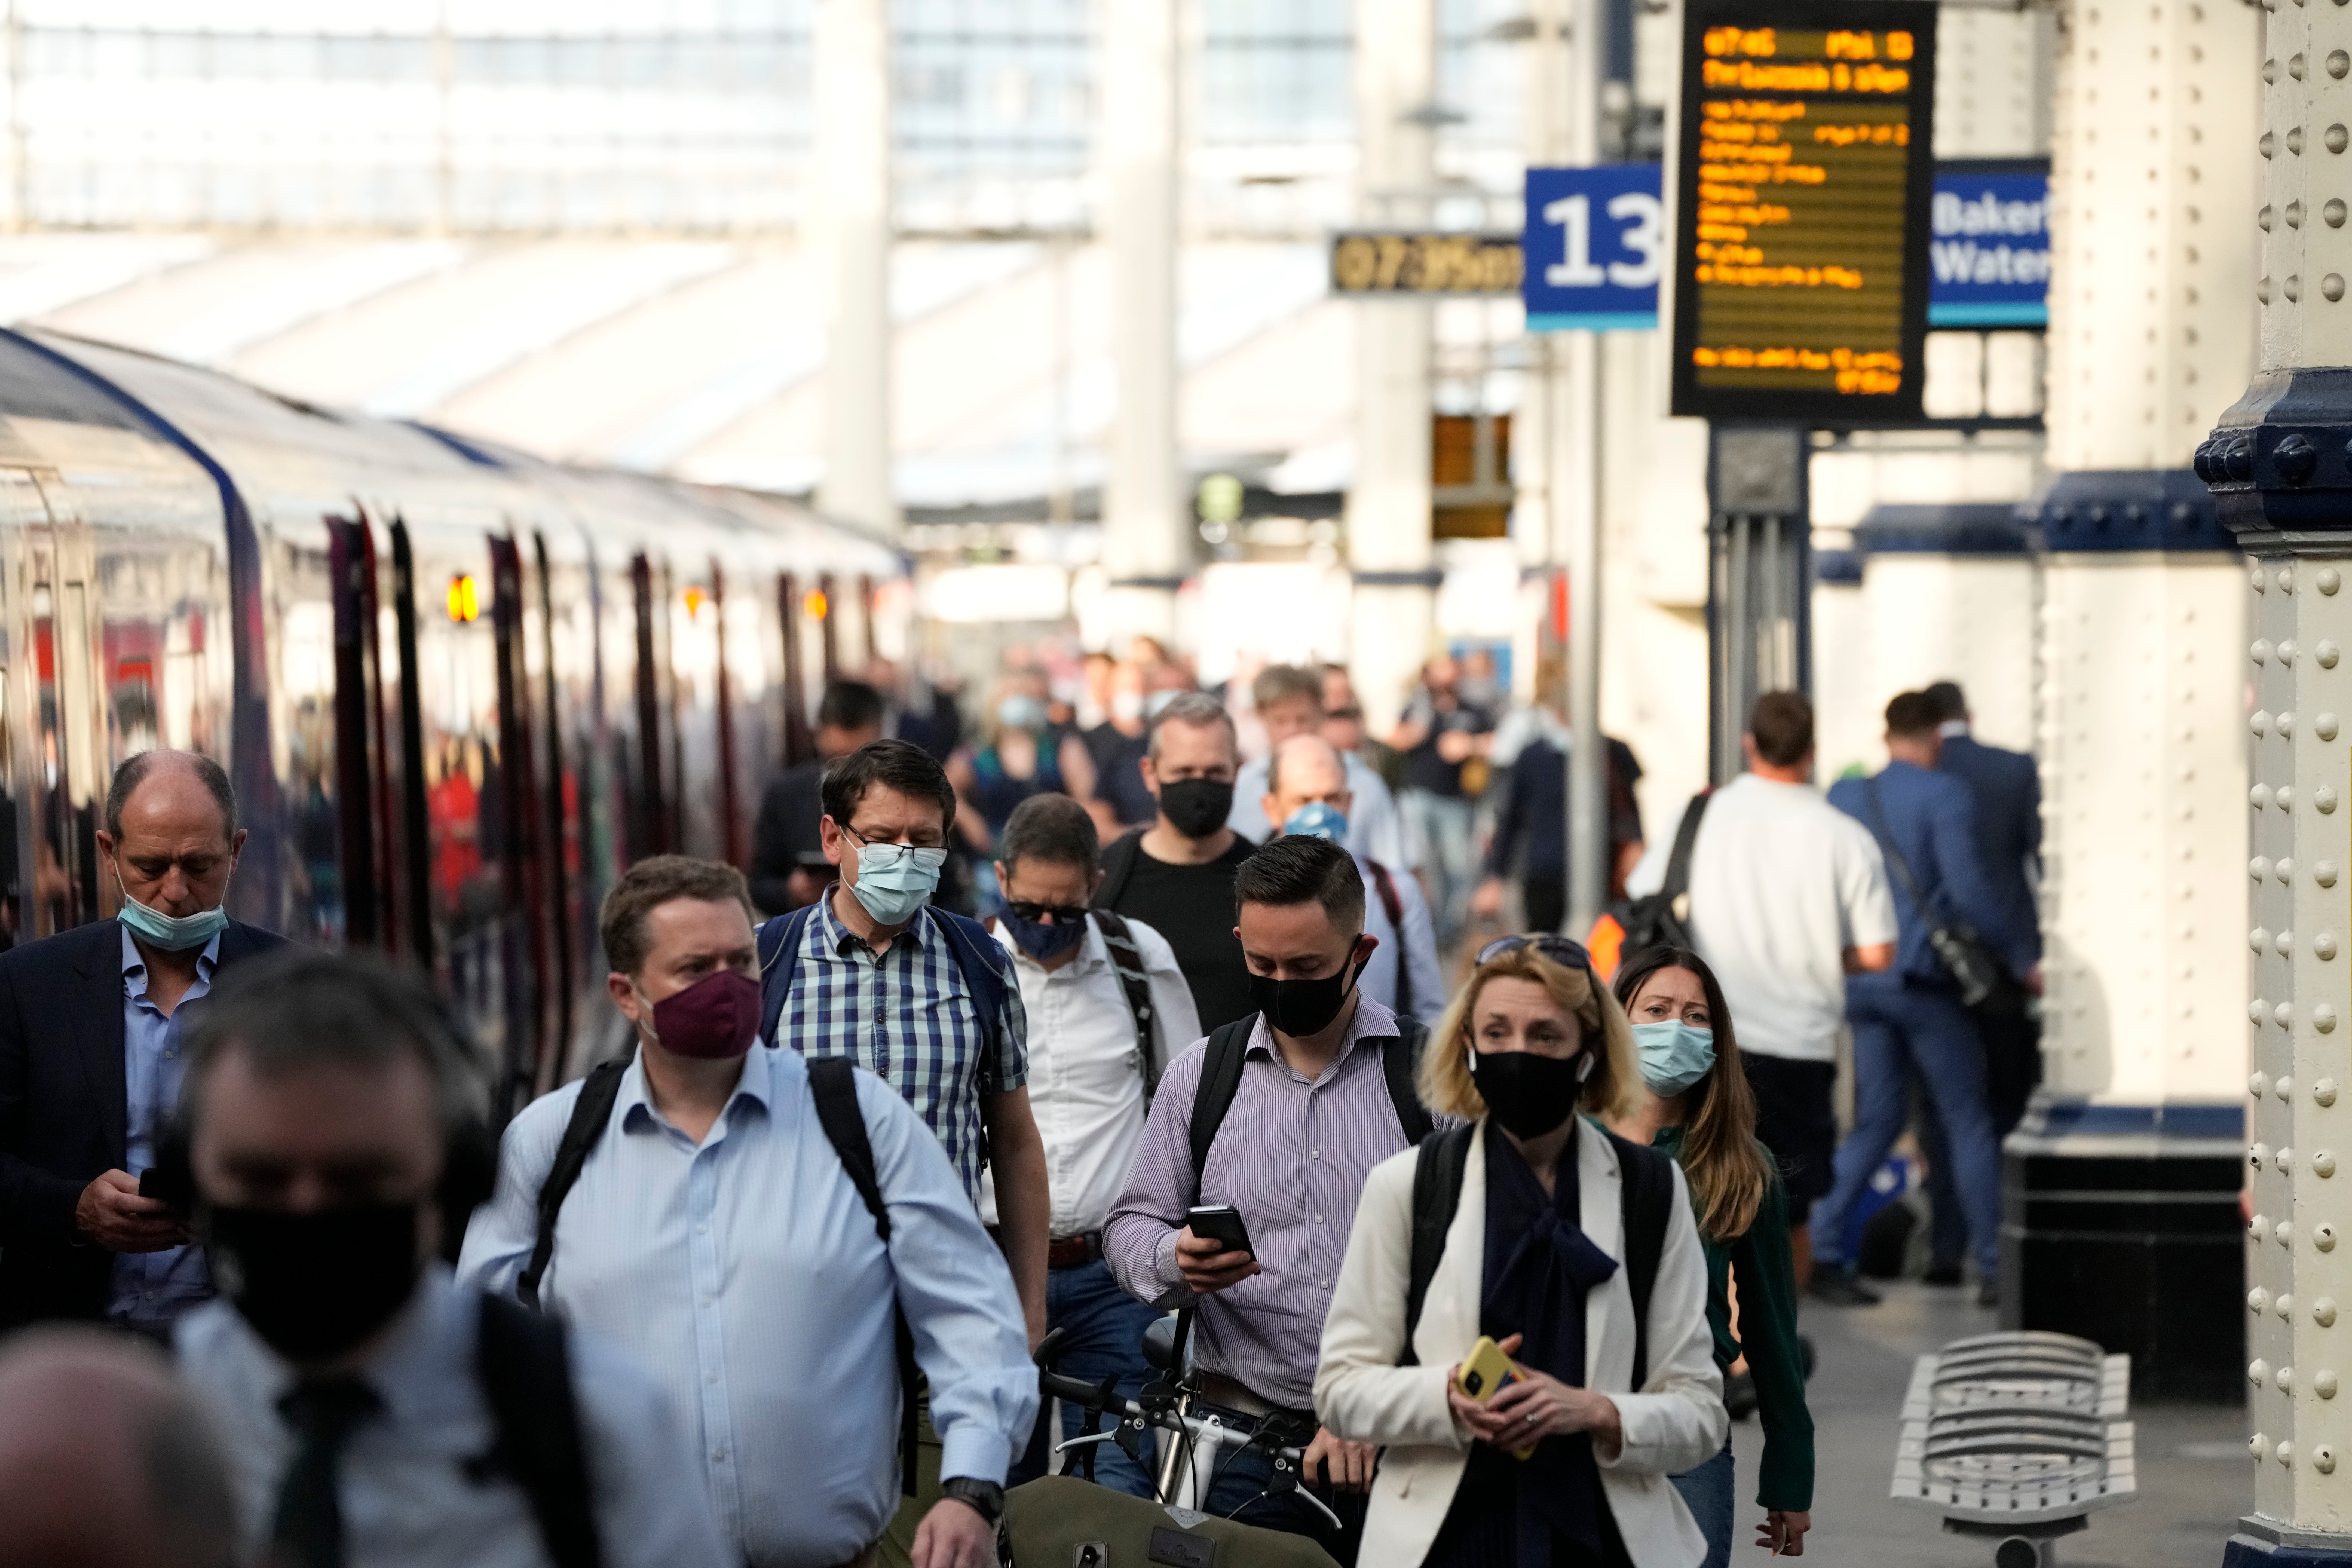 Face masks will still be mandatory on Transport for London services after Monday